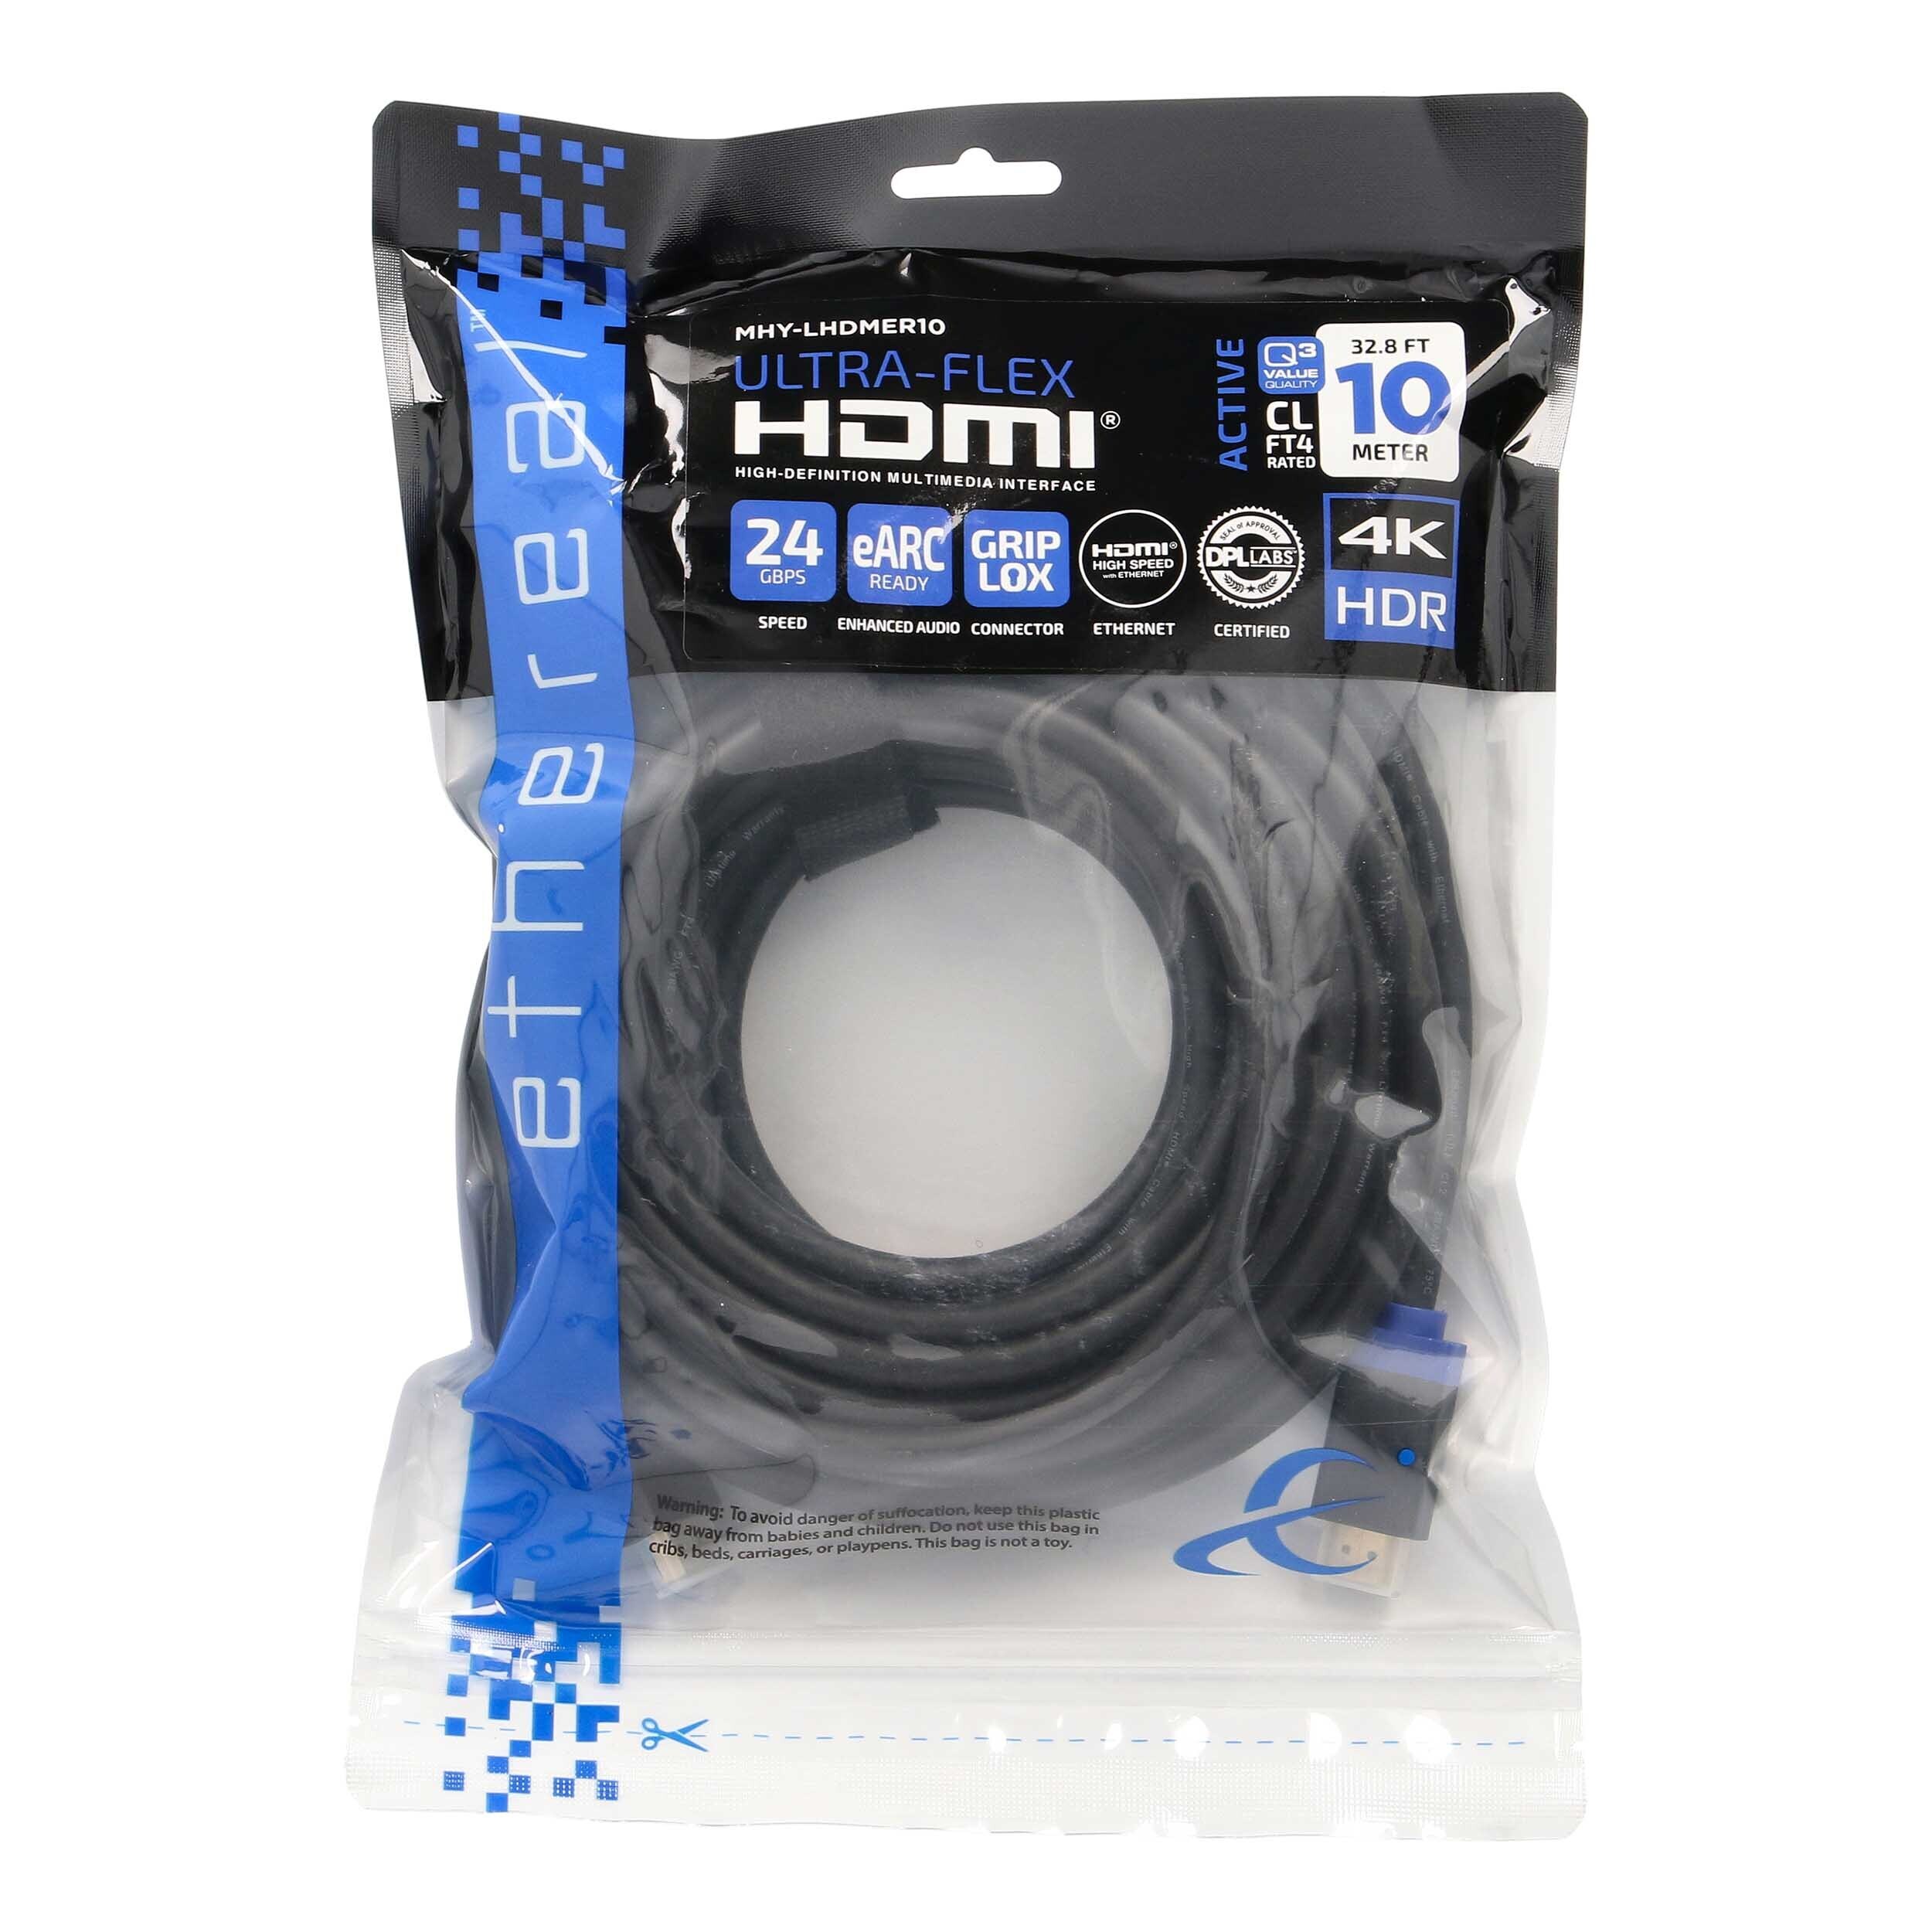 10 Meter (32.8 FT) High Speed HDMI Cable with Ethernet